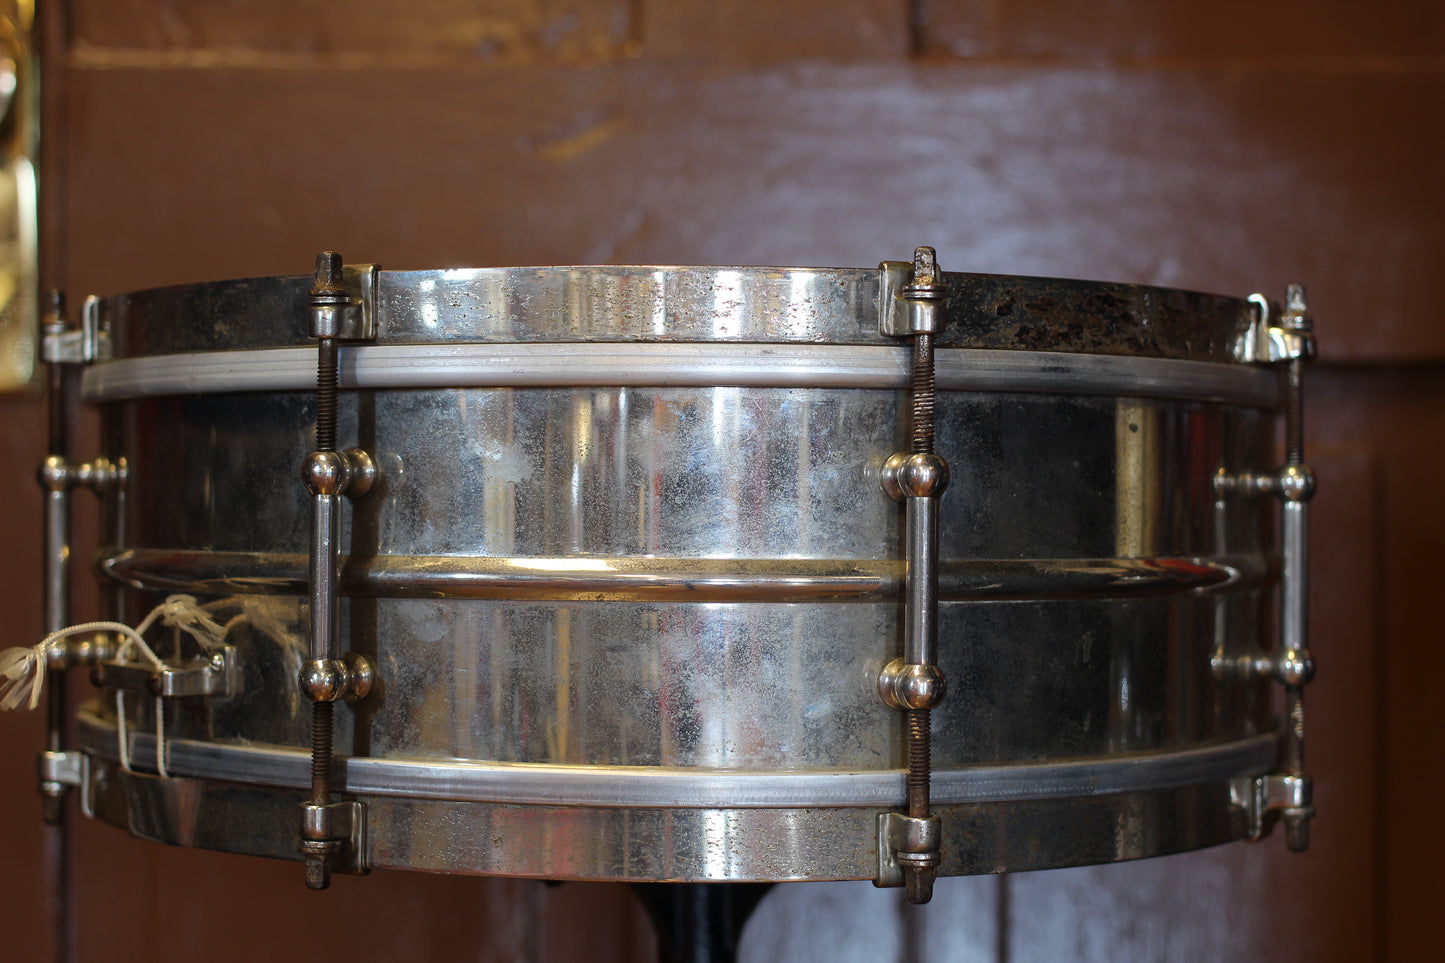 1930's Leedy Reliance All Metal Snare Drum 5"x14"